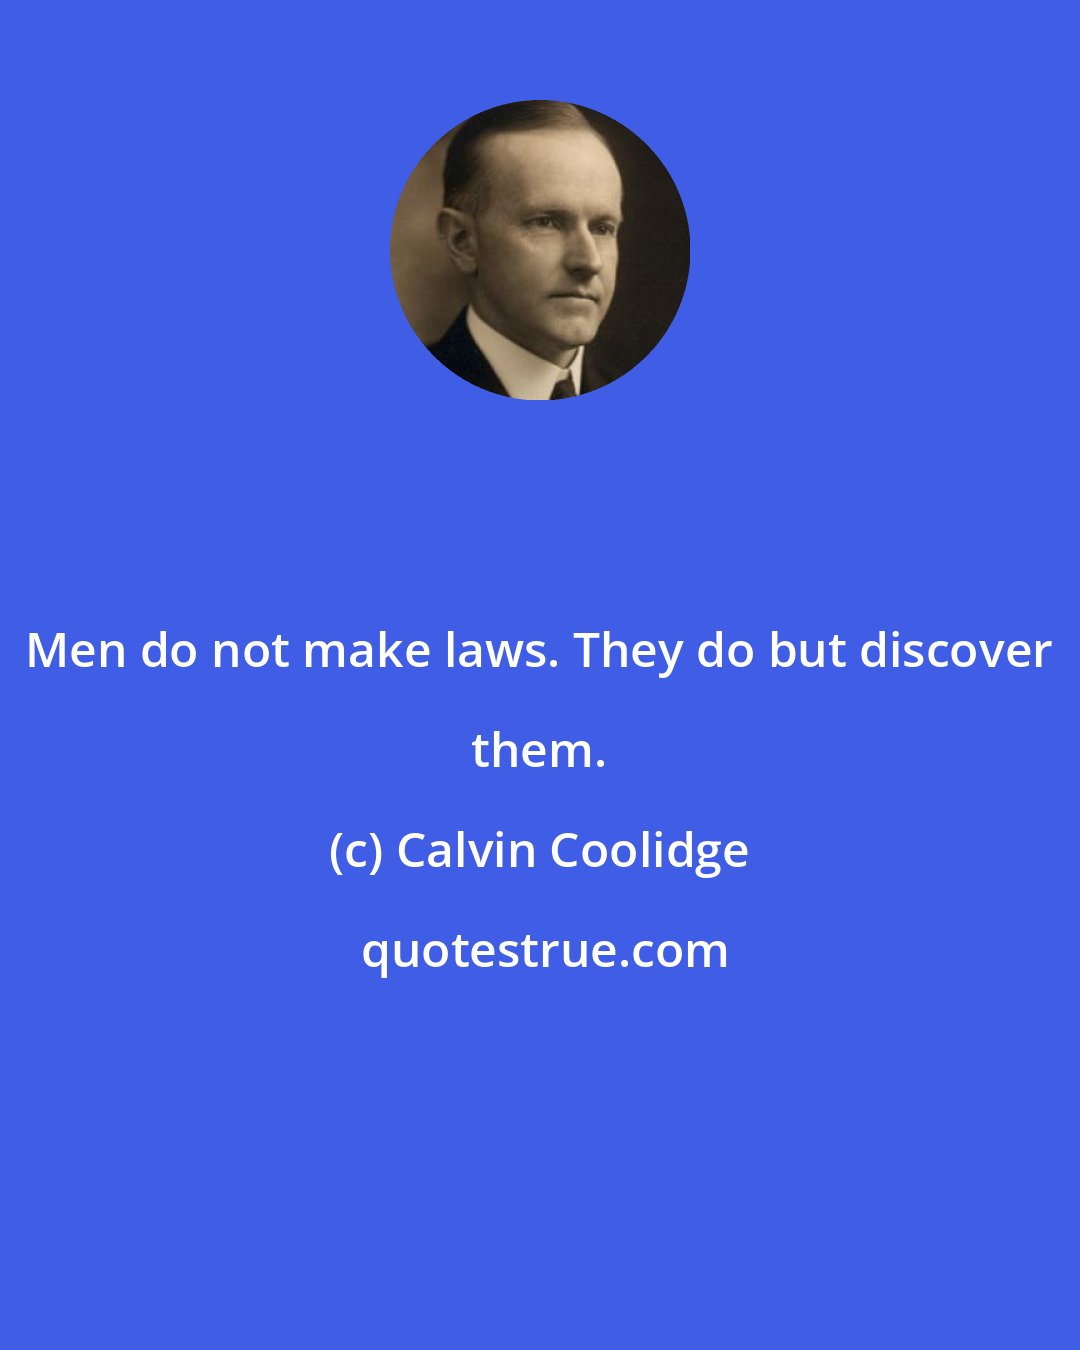 Calvin Coolidge: Men do not make laws. They do but discover them.